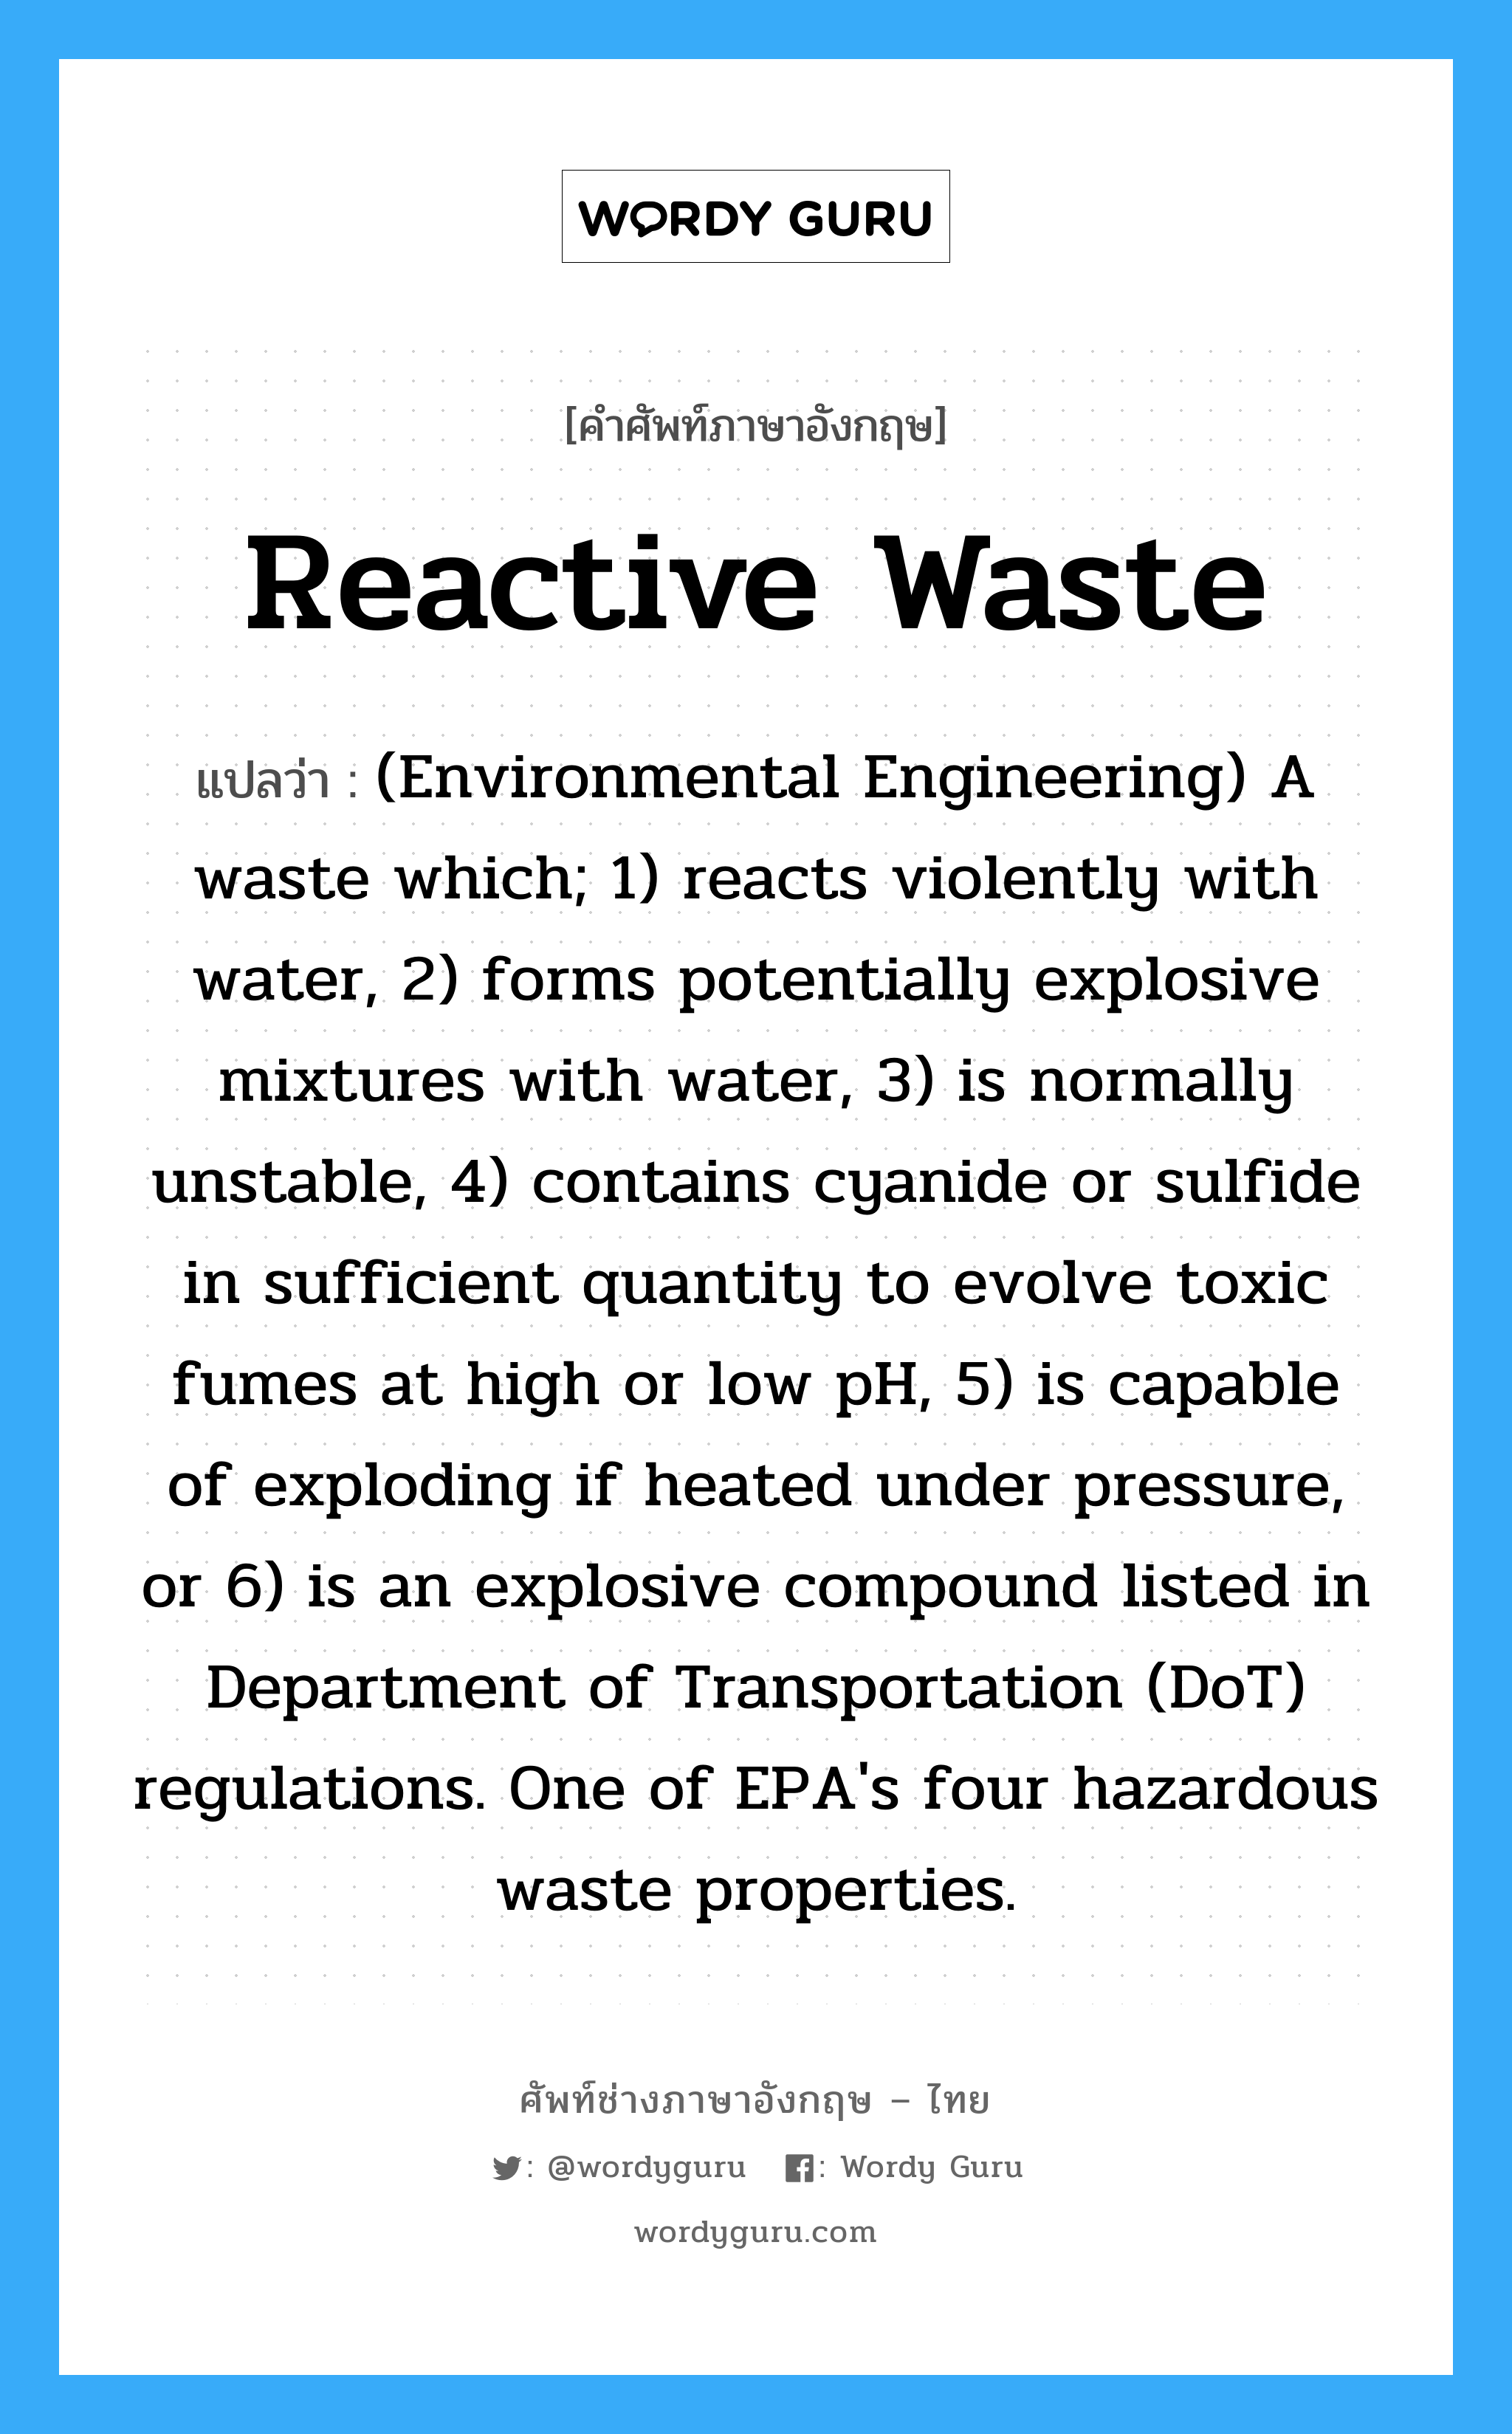 (Environmental Engineering) A waste which; 1) reacts violently with water, 2) forms potentially explosive mixtures with water, 3) is normally unstable, 4) contains cyanide or sulfide in sufficient quantity to evolve toxic fumes at high or low pH, 5) is capable of exploding if heated under pressure, or 6) is an explosive compound listed in Department of Transportation (DoT) regulations. One of EPA's four hazardous waste properties. ภาษาอังกฤษ?, คำศัพท์ช่างภาษาอังกฤษ - ไทย (Environmental Engineering) A waste which; 1) reacts violently with water, 2) forms potentially explosive mixtures with water, 3) is normally unstable, 4) contains cyanide or sulfide in sufficient quantity to evolve toxic fumes at high or low pH, 5) is capable of exploding if heated under pressure, or 6) is an explosive compound listed in Department of Transportation (DoT) regulations. One of EPA's four hazardous waste properties. คำศัพท์ภาษาอังกฤษ (Environmental Engineering) A waste which; 1) reacts violently with water, 2) forms potentially explosive mixtures with water, 3) is normally unstable, 4) contains cyanide or sulfide in sufficient quantity to evolve toxic fumes at high or low pH, 5) is capable of exploding if heated under pressure, or 6) is an explosive compound listed in Department of Transportation (DoT) regulations. One of EPA's four hazardous waste properties. แปลว่า Reactive waste